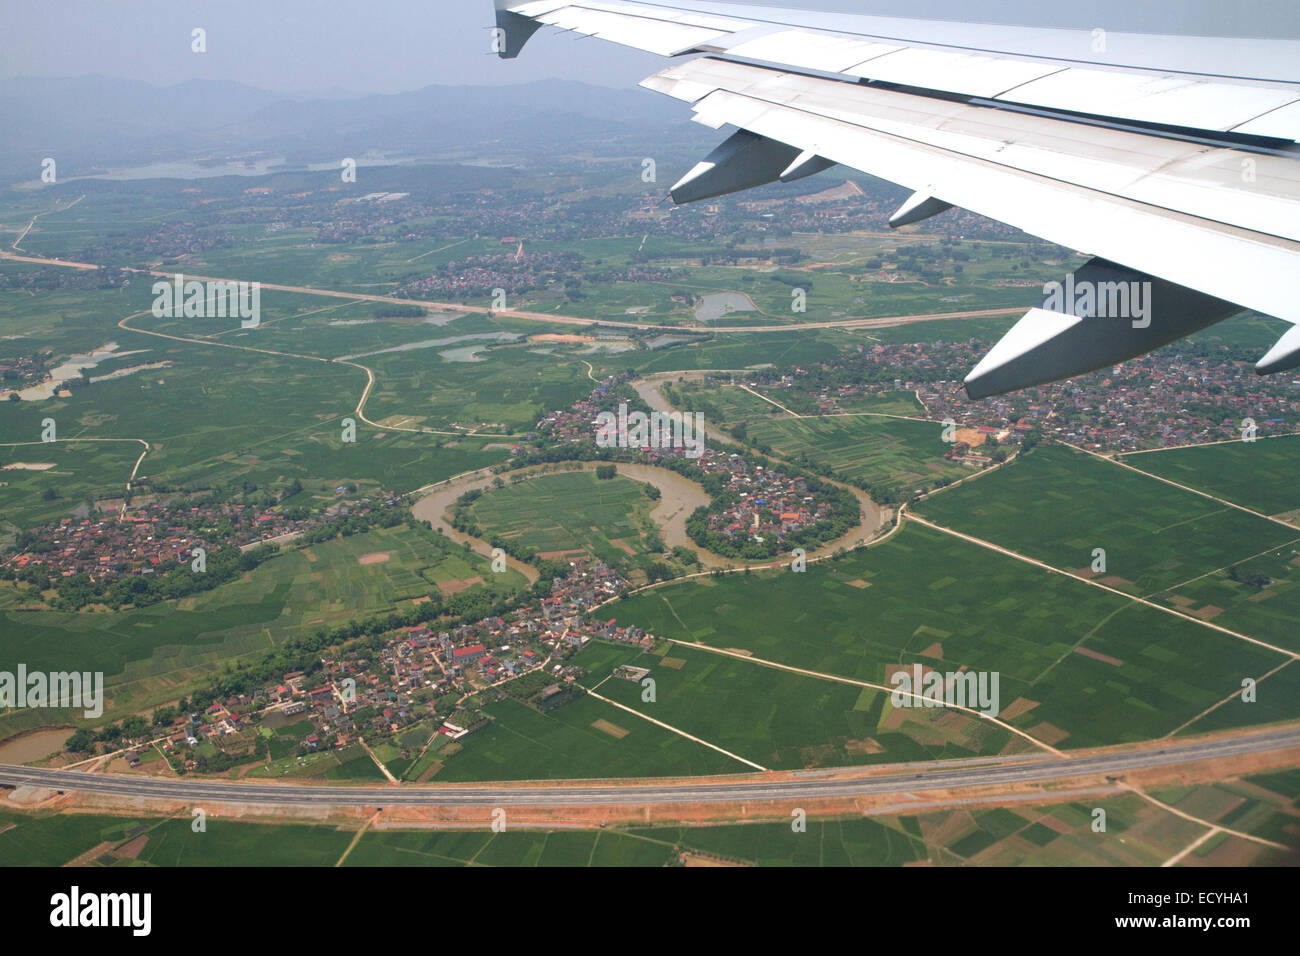 Aerial view of the countryside and housing near Hanoi, Vietnam. Stock Photo